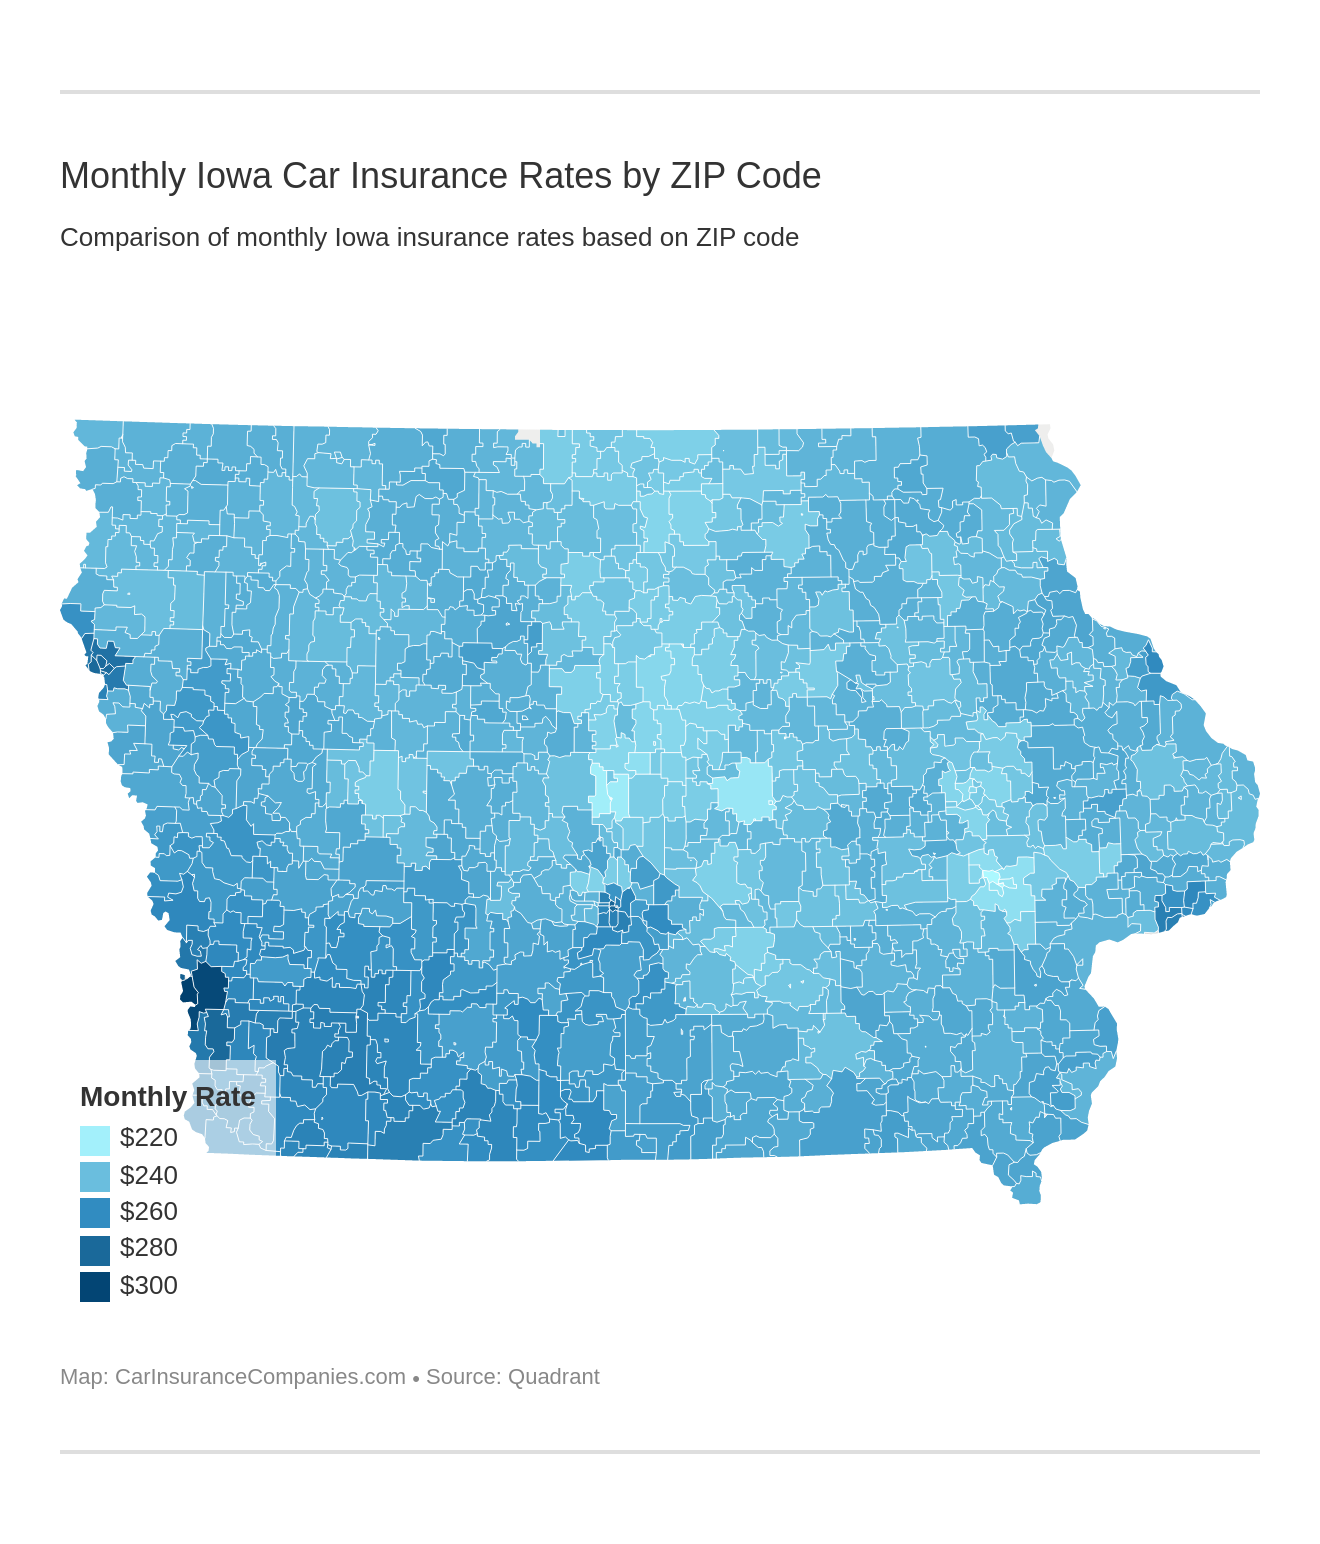 Monthly Iowa Car Insurance Rates by ZIP Code